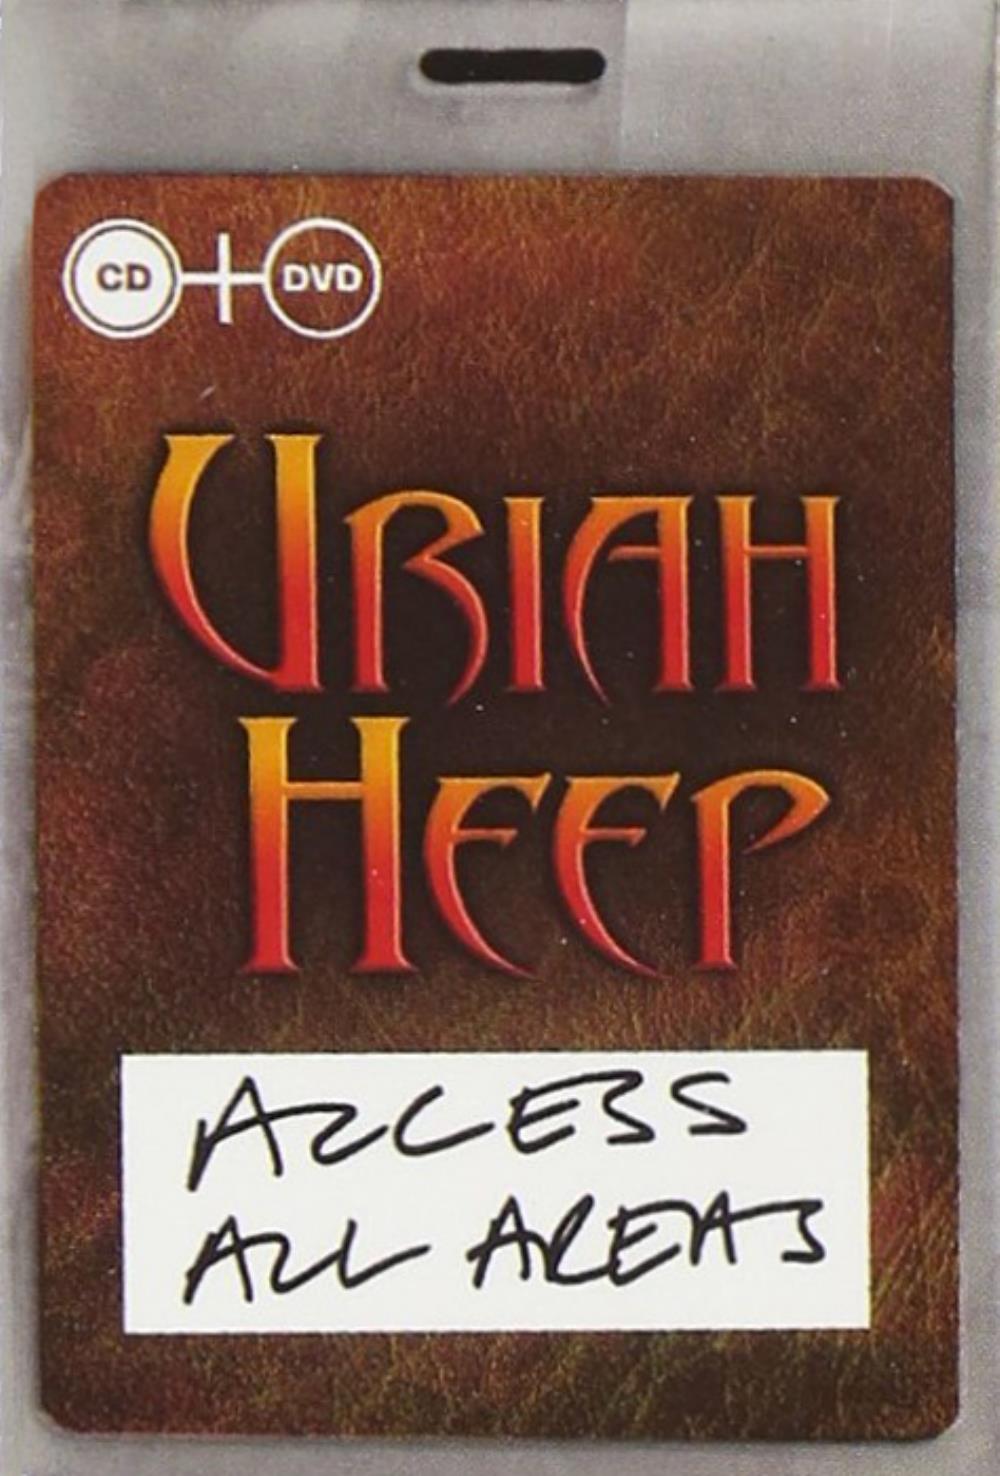 Uriah Heep - Access All Areas (20th Anniversary Concert) CD (album) cover